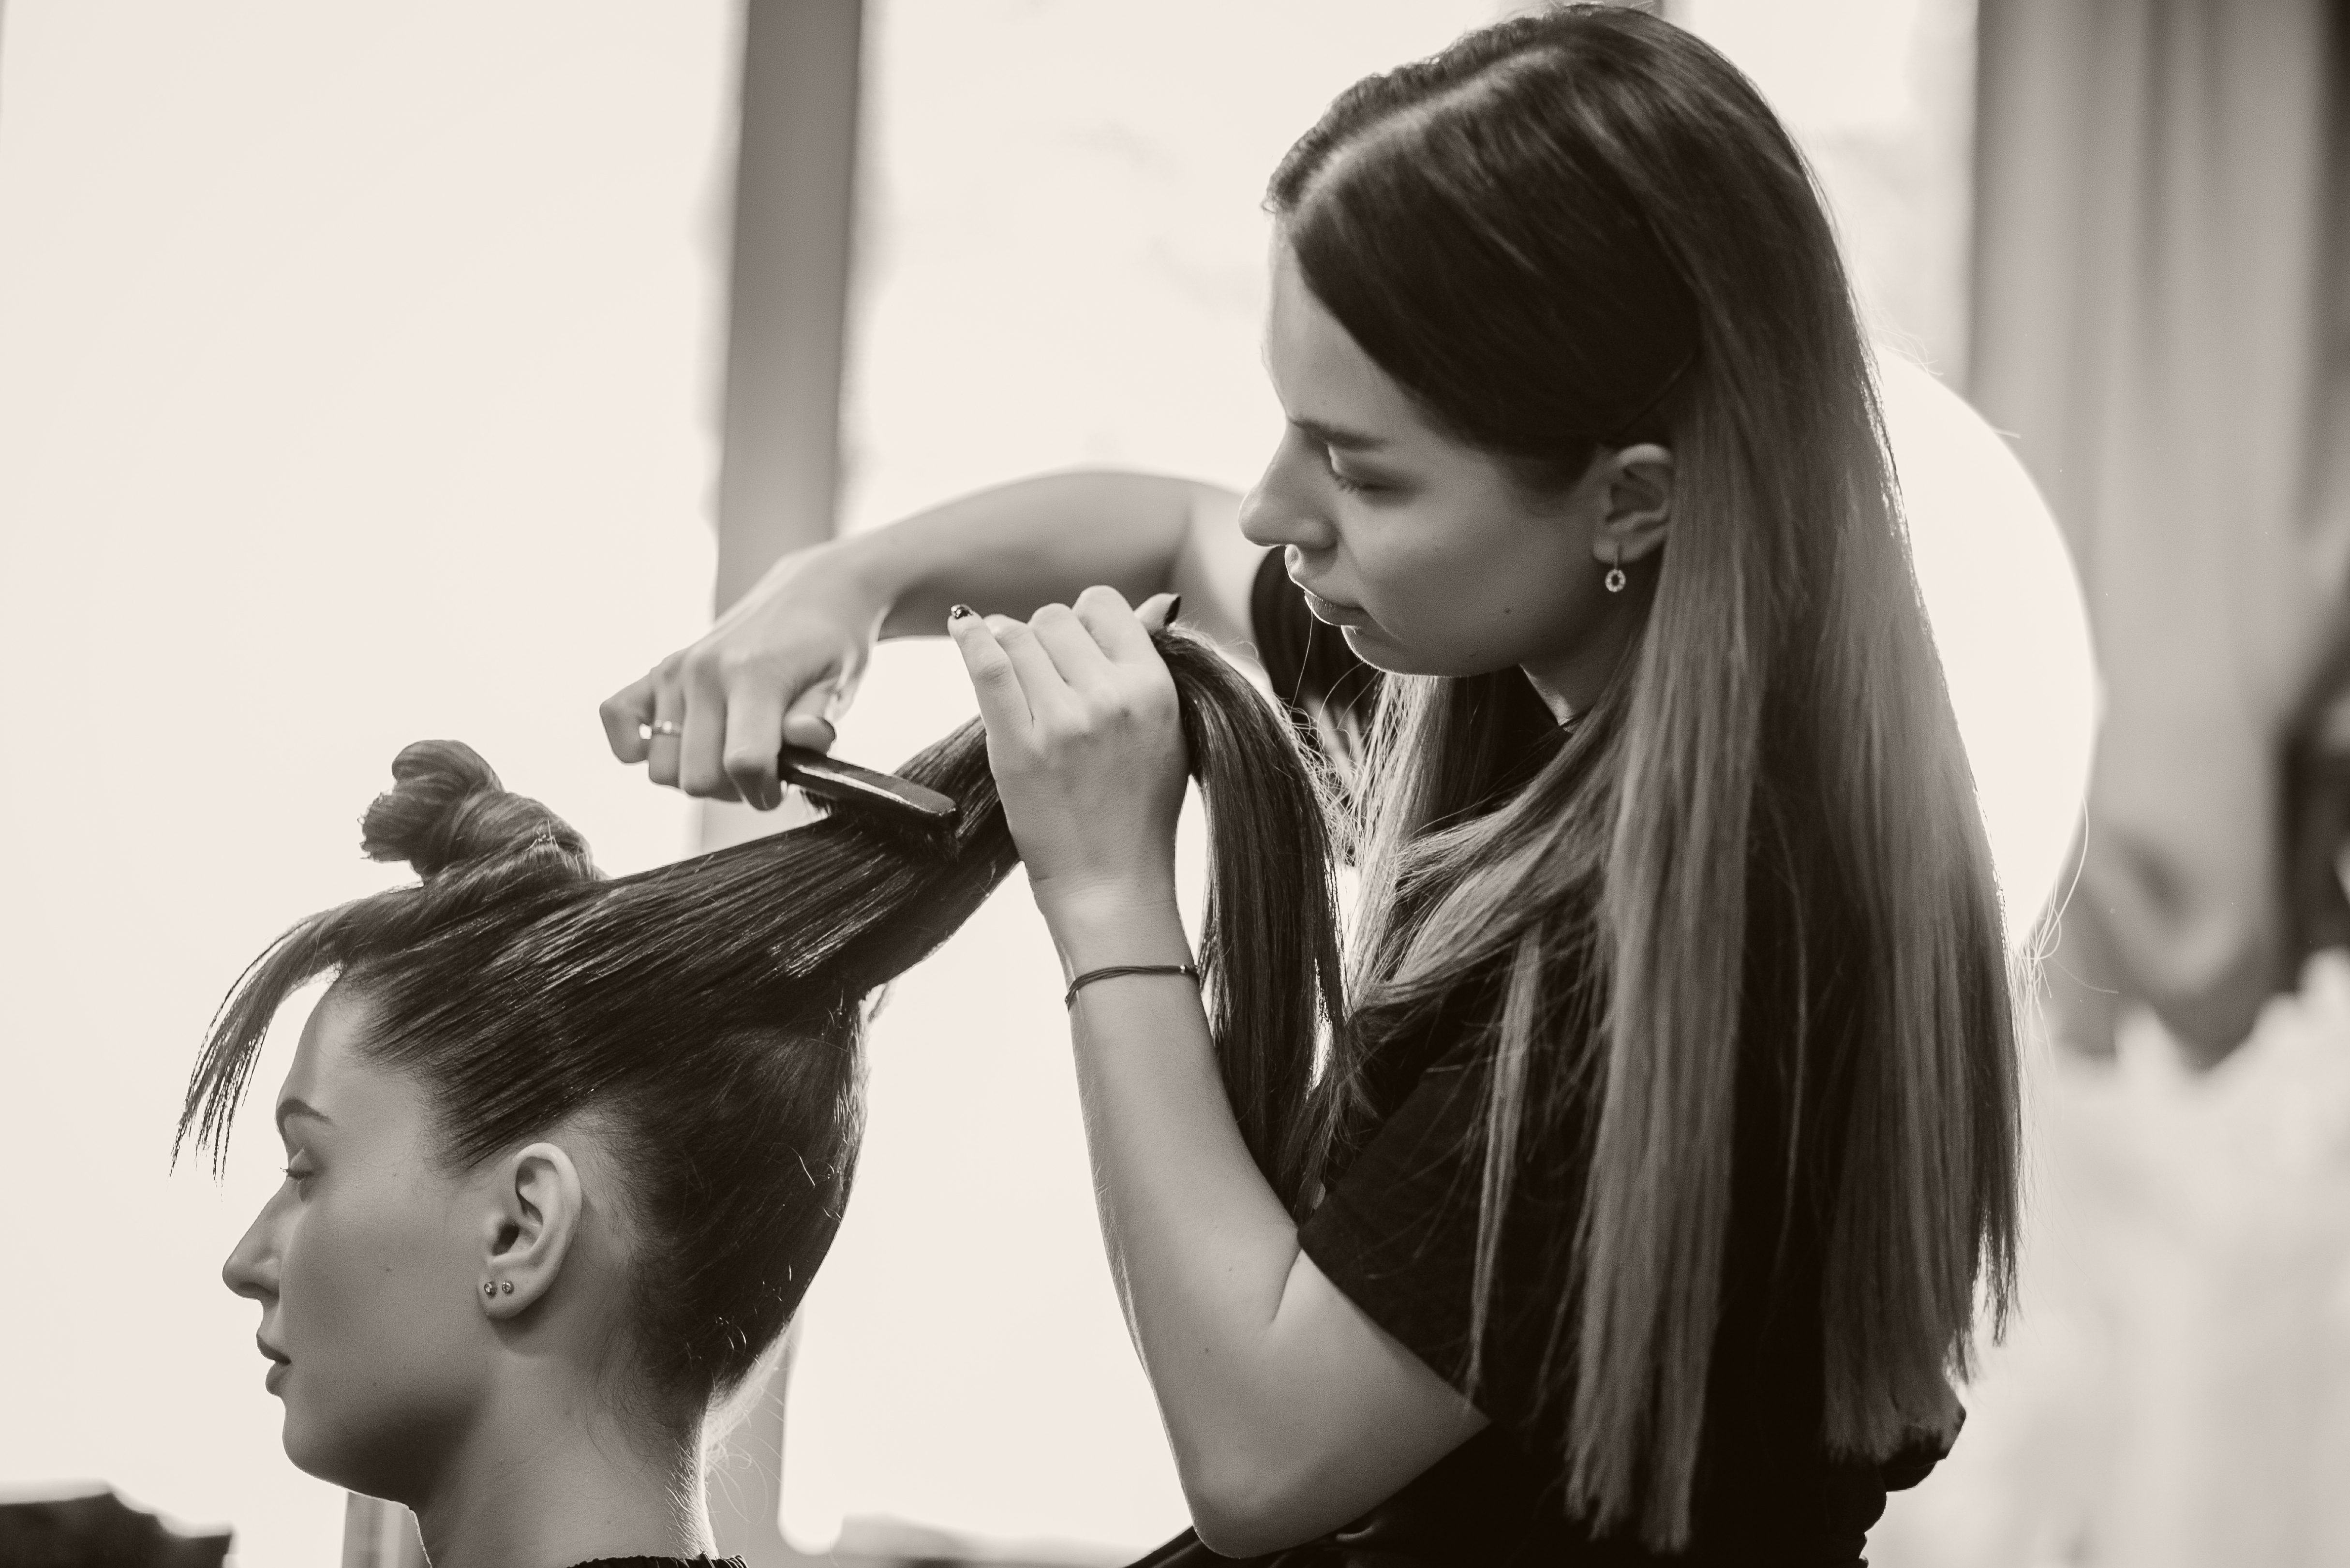 Hairdressing Apprenticeships Your Business Needs